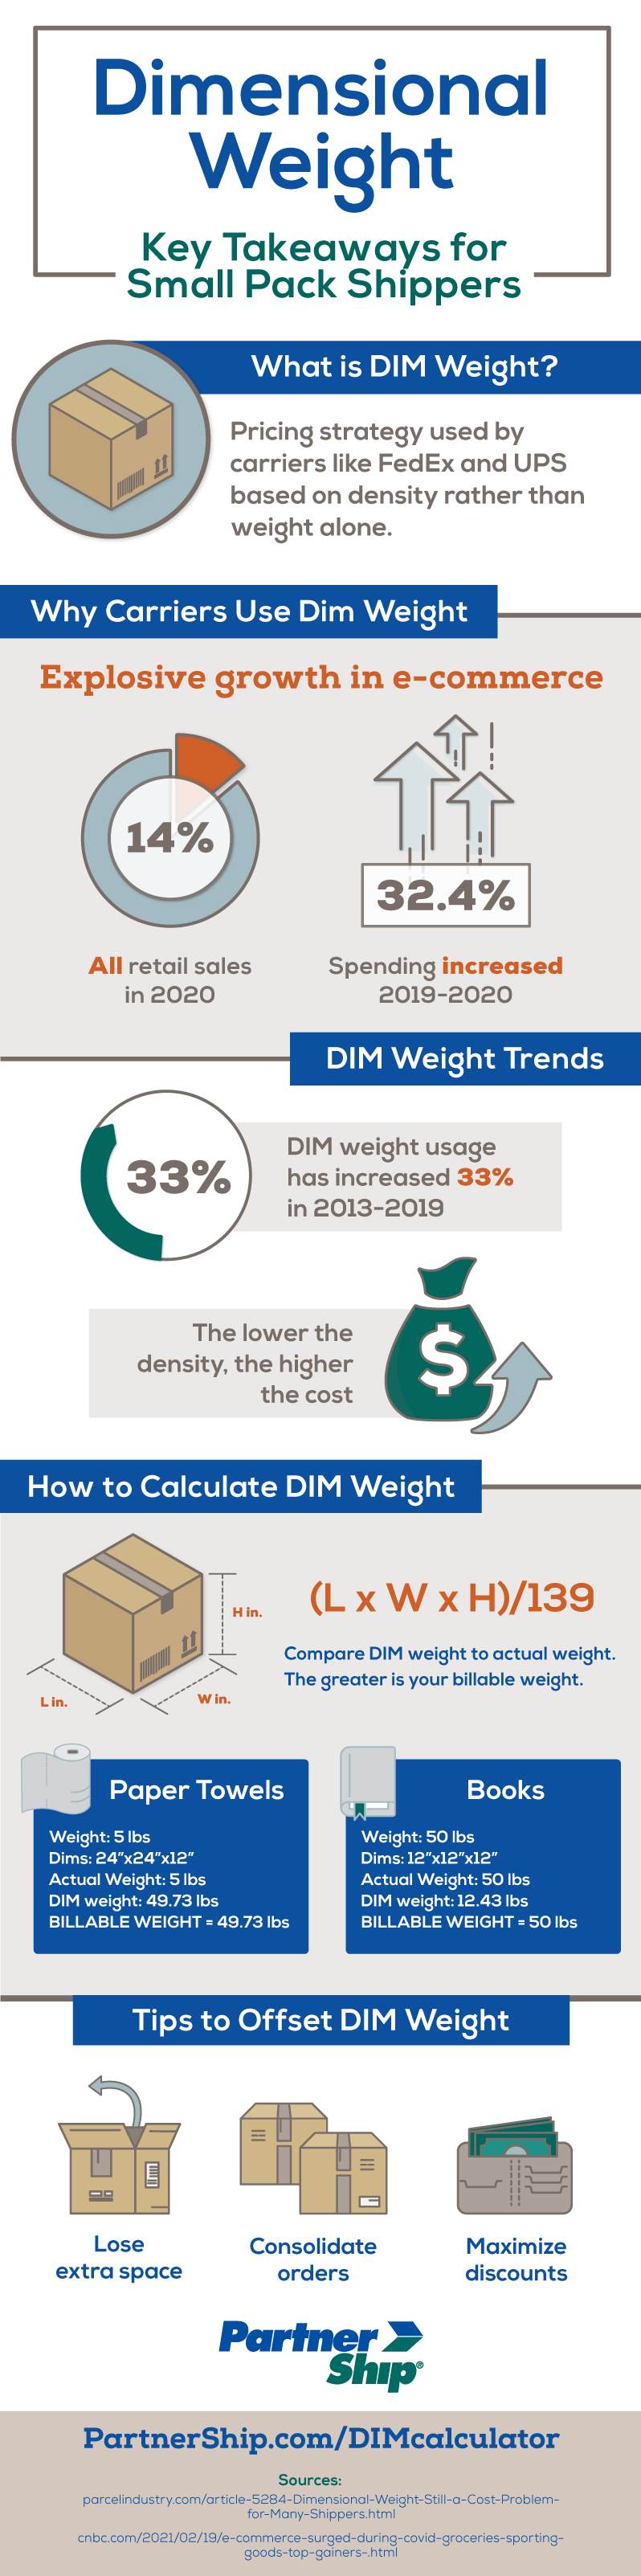 DIM Weight Infographic